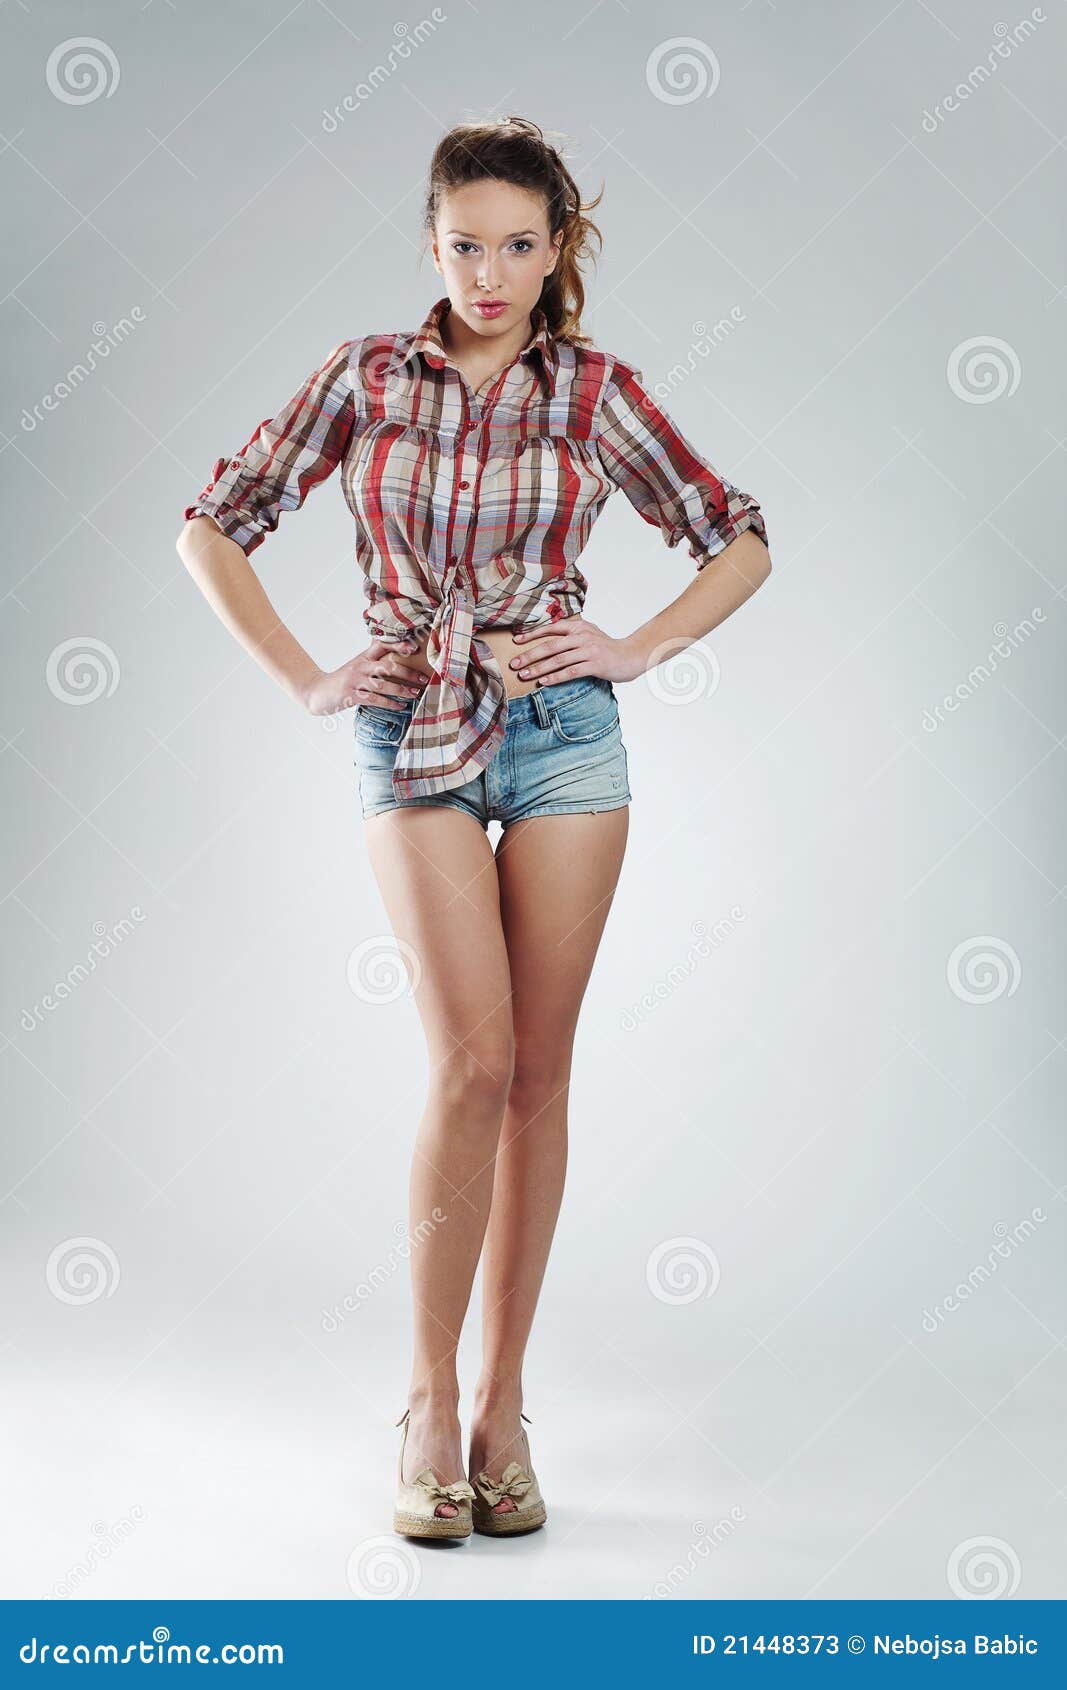 Girl wearing hot pants stock image. Image of long, jeans - 21448373